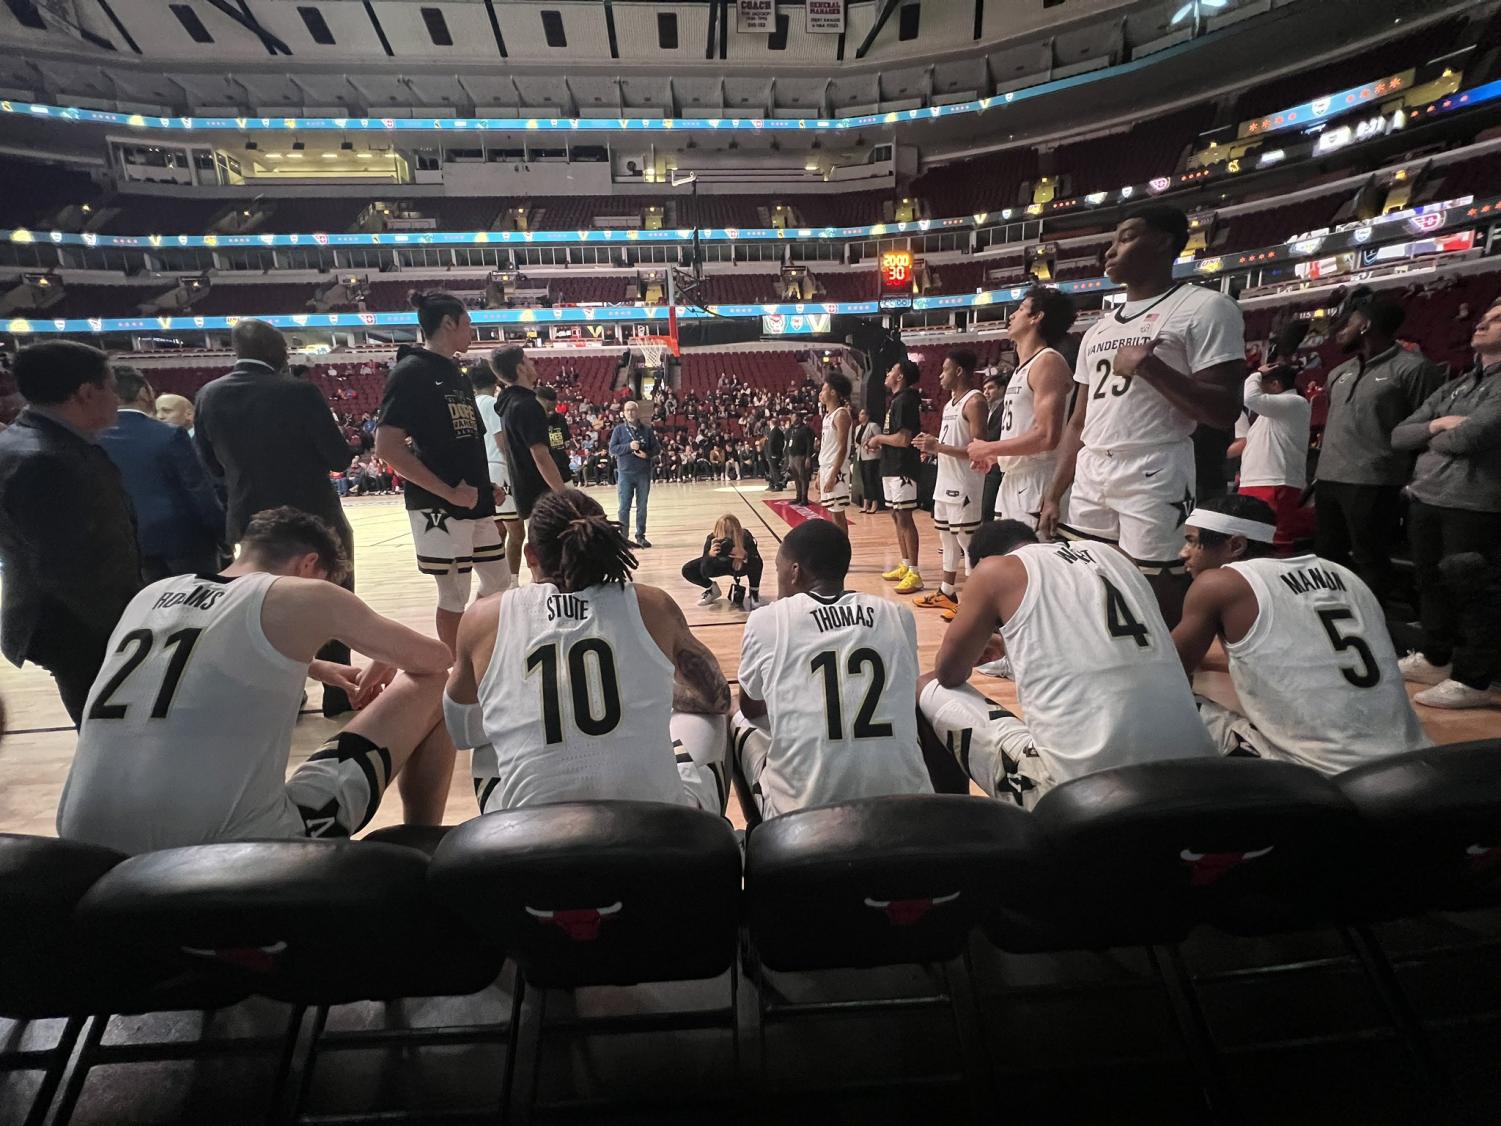 Vanderbilt starters wait for the lineup to be announced on December 17, 2022 at the United Center in Chicago, Illinois (Vanderbilt Athletics).